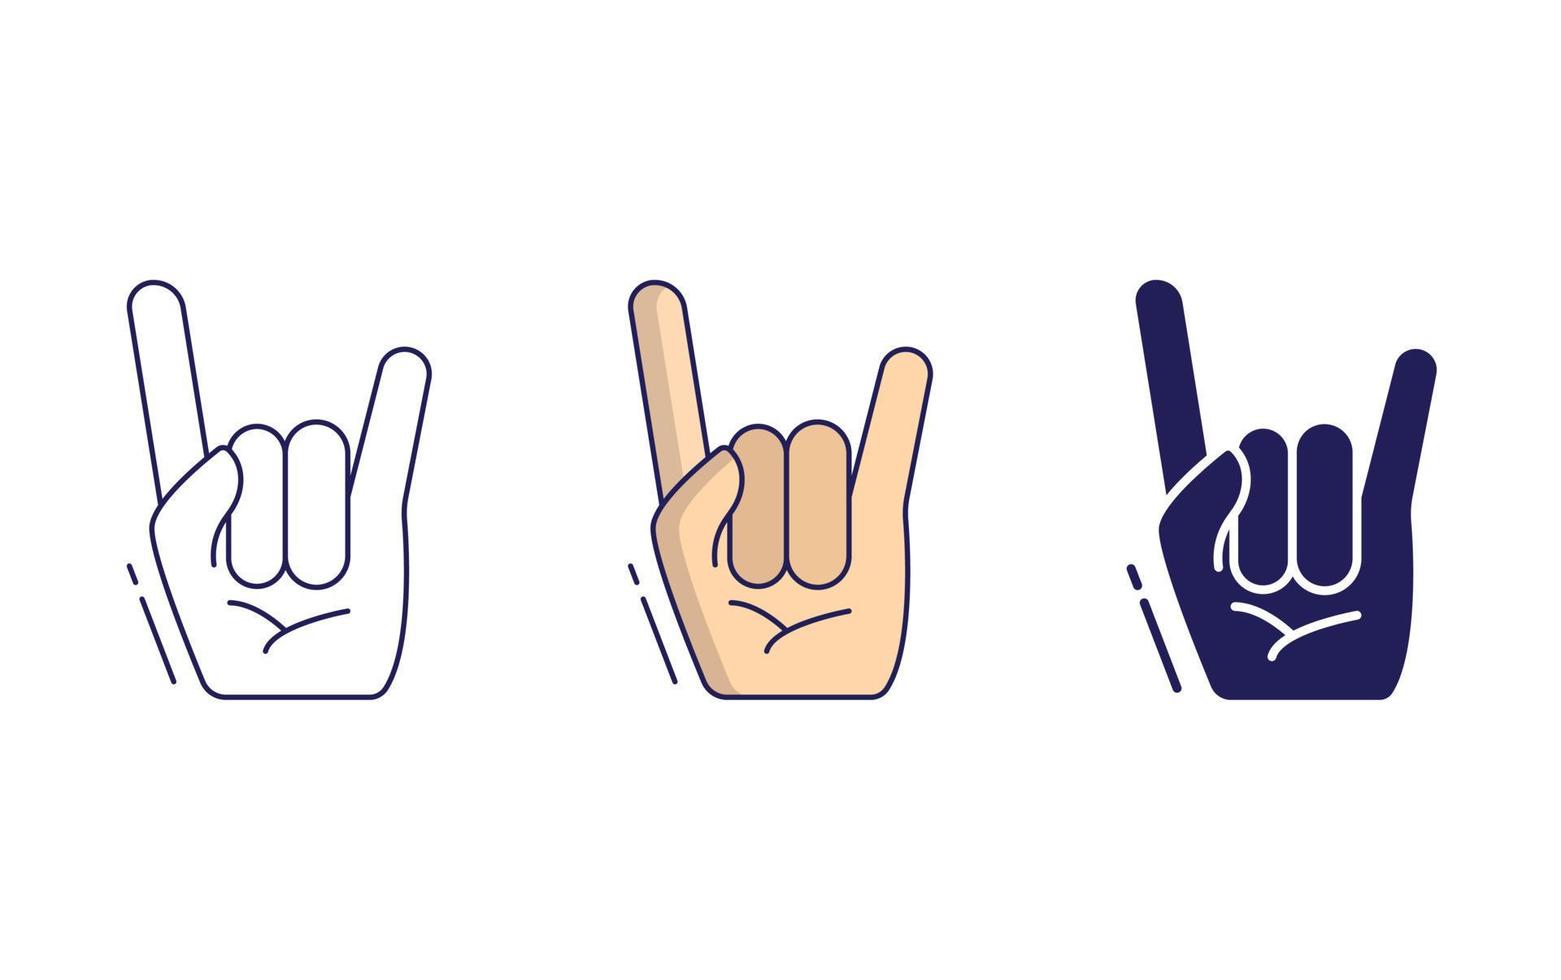 Horns up vector icon